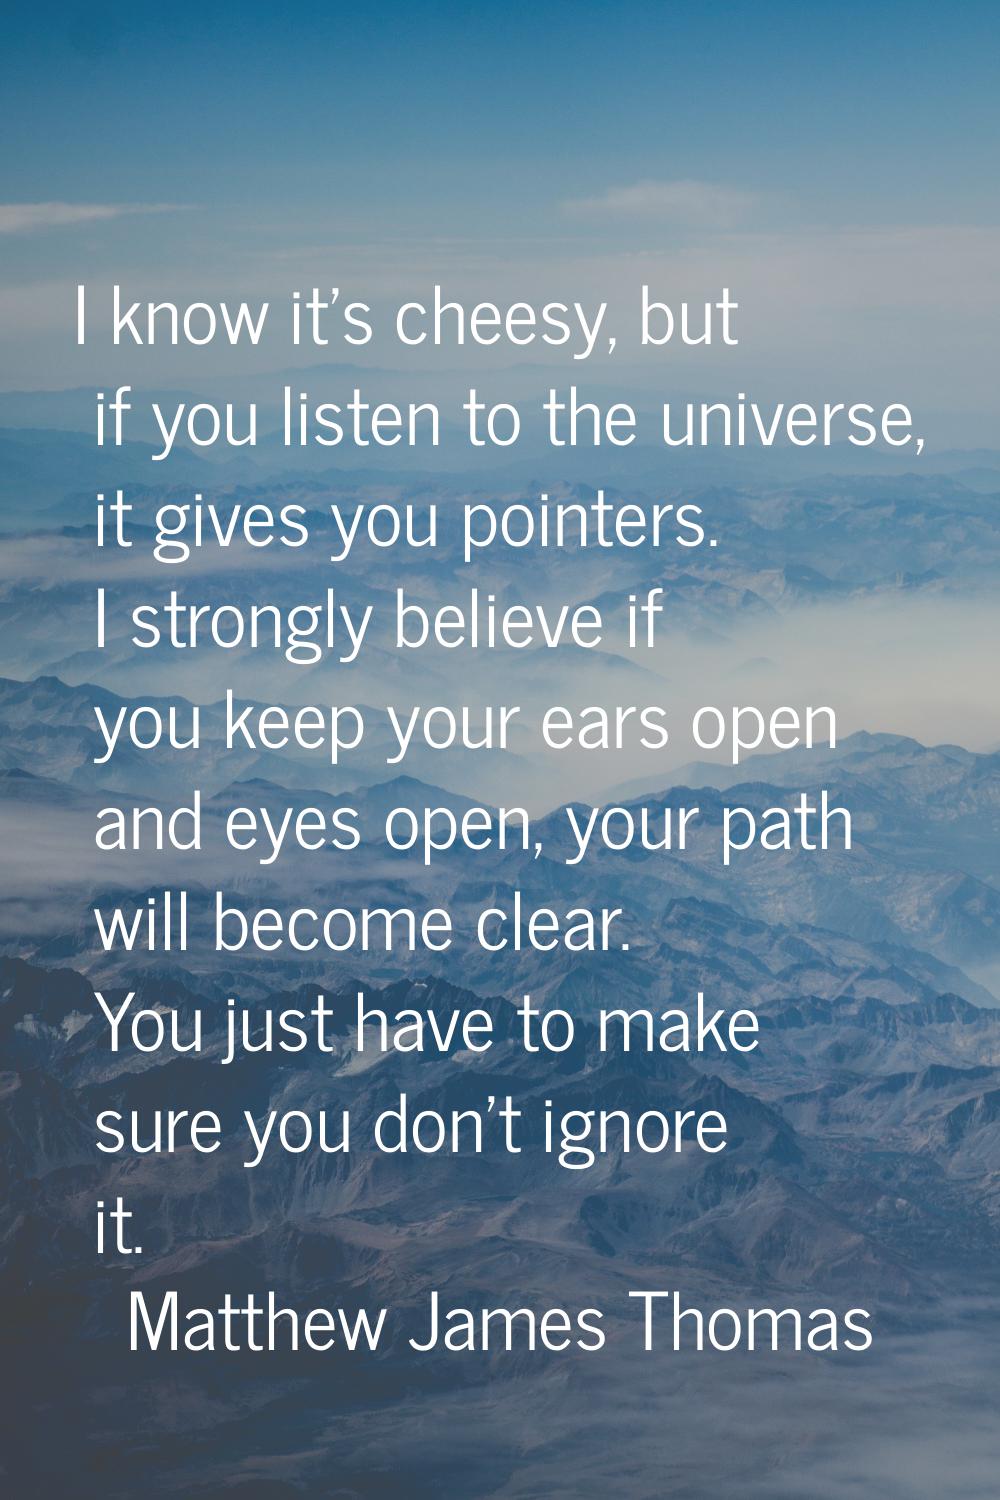 I know it's cheesy, but if you listen to the universe, it gives you pointers. I strongly believe if